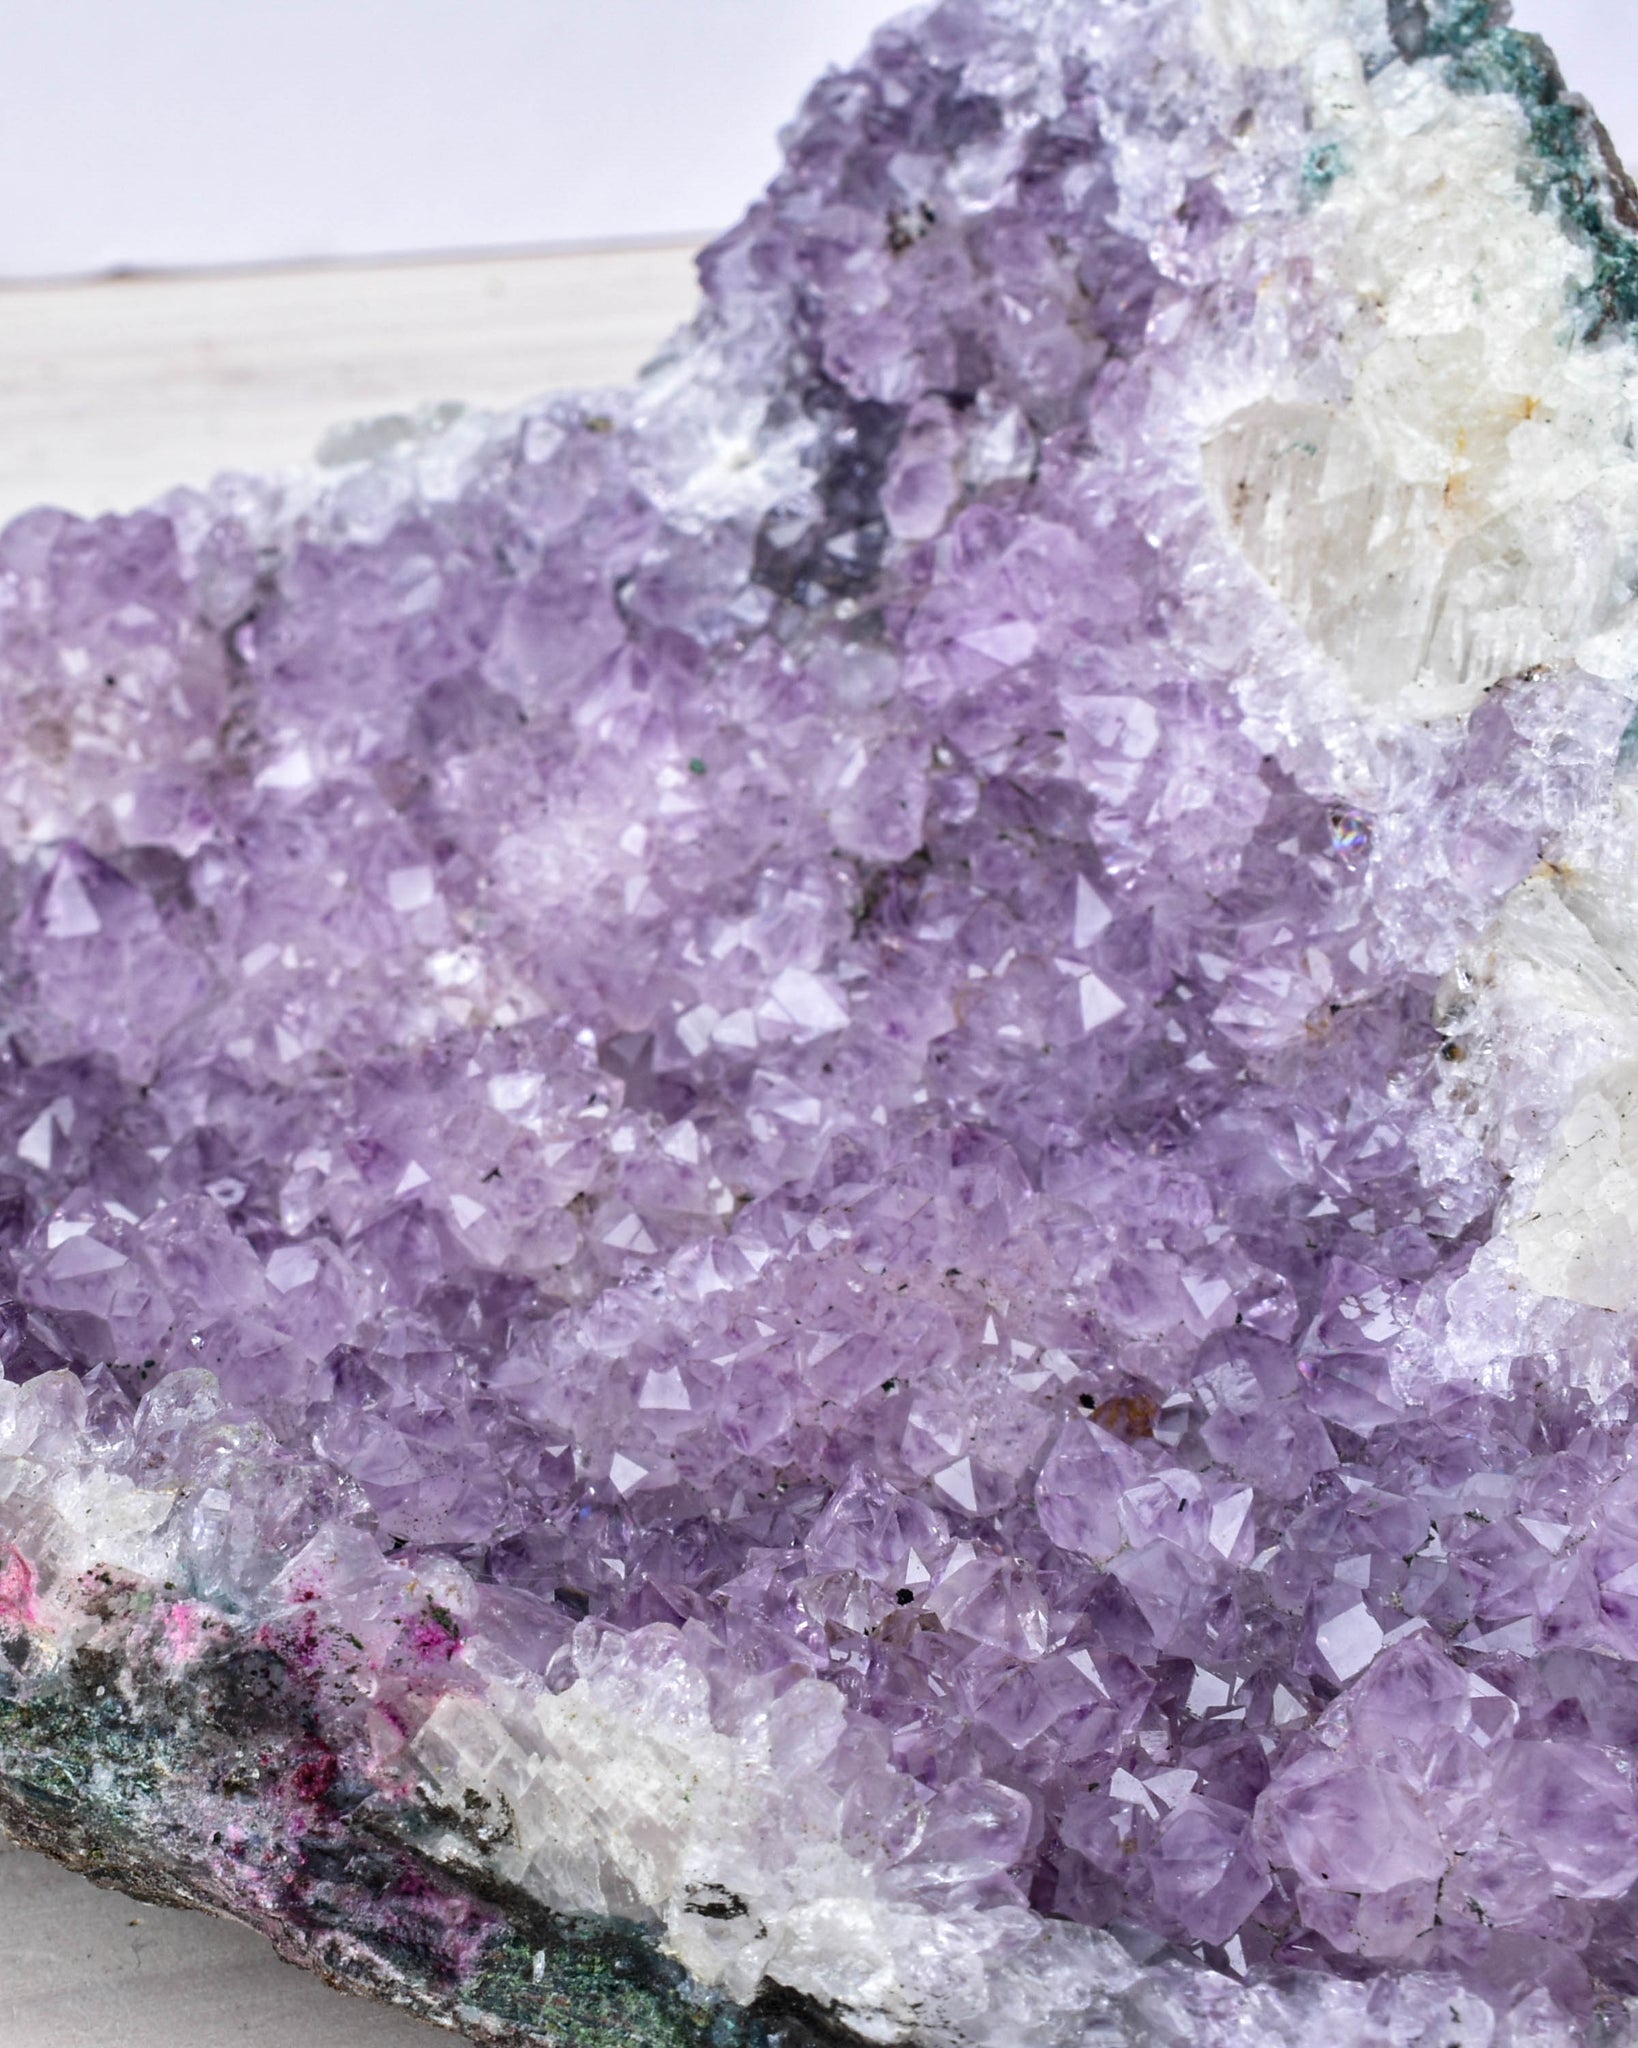 Amethyst Druzy with Calcite